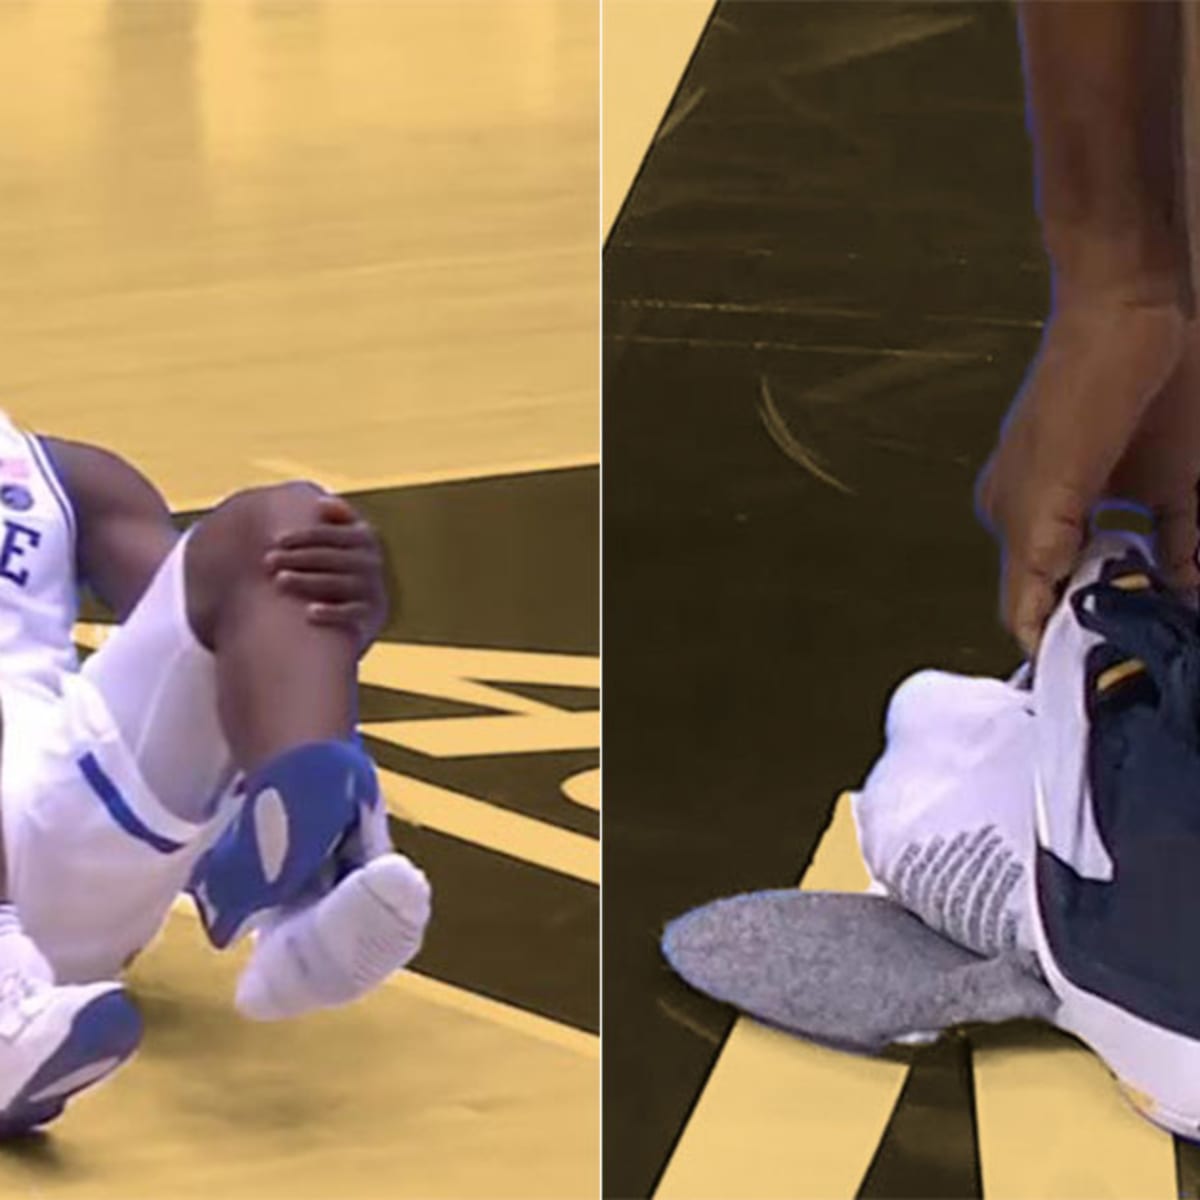 Zion Williamson's shoe explosion, as explained by a biomechanics expert 